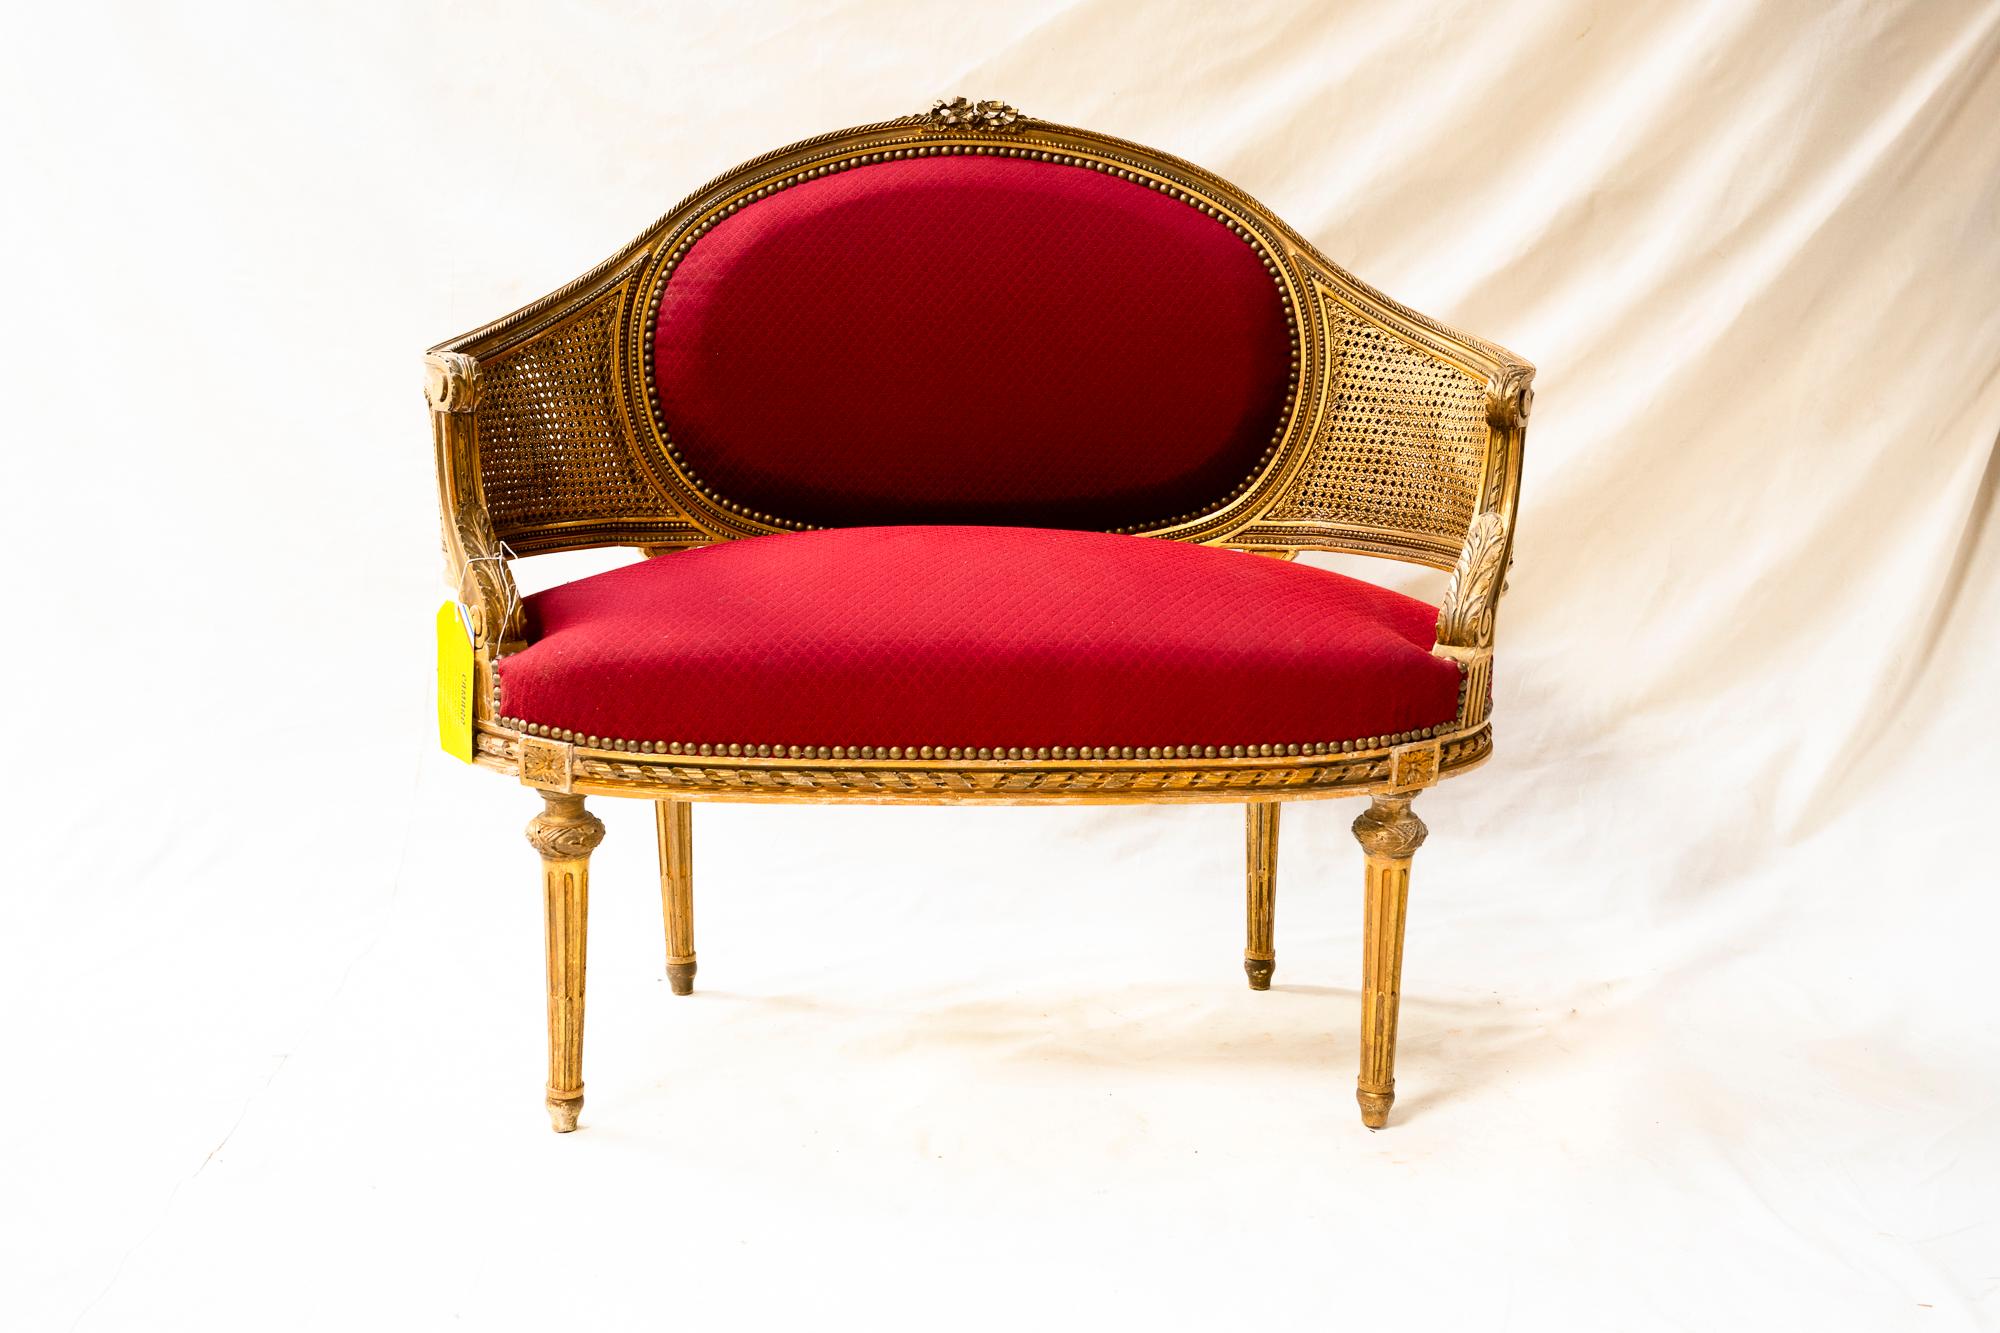 This lovely gilt wood and double-walled gilltcane canapé was lovingly reupholstered in a bright red fabric in the Southwest of France, near the chateau where it was discovered, and can easily be recovered in a fabric of choice.
 